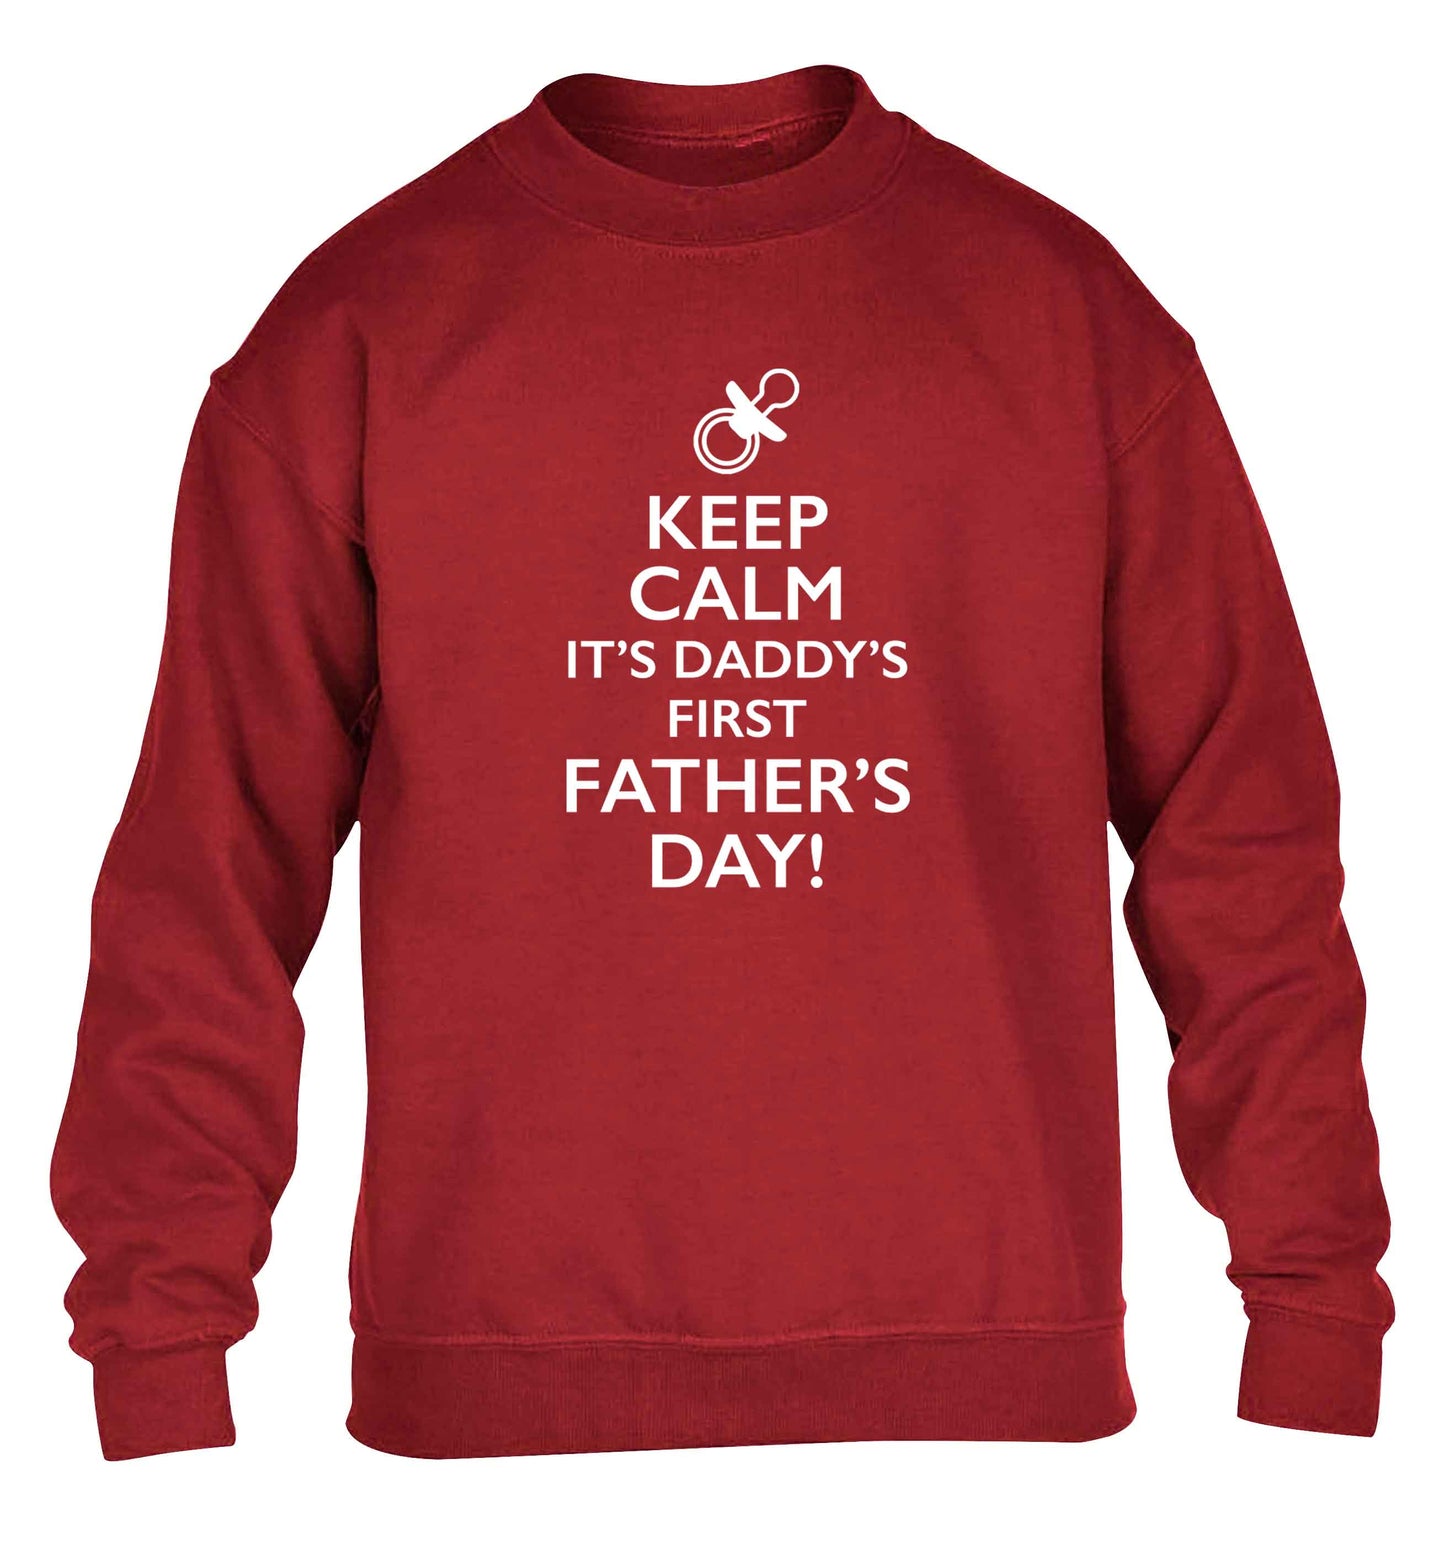 Keep calm it's daddys first father's day children's grey sweater 12-13 Years